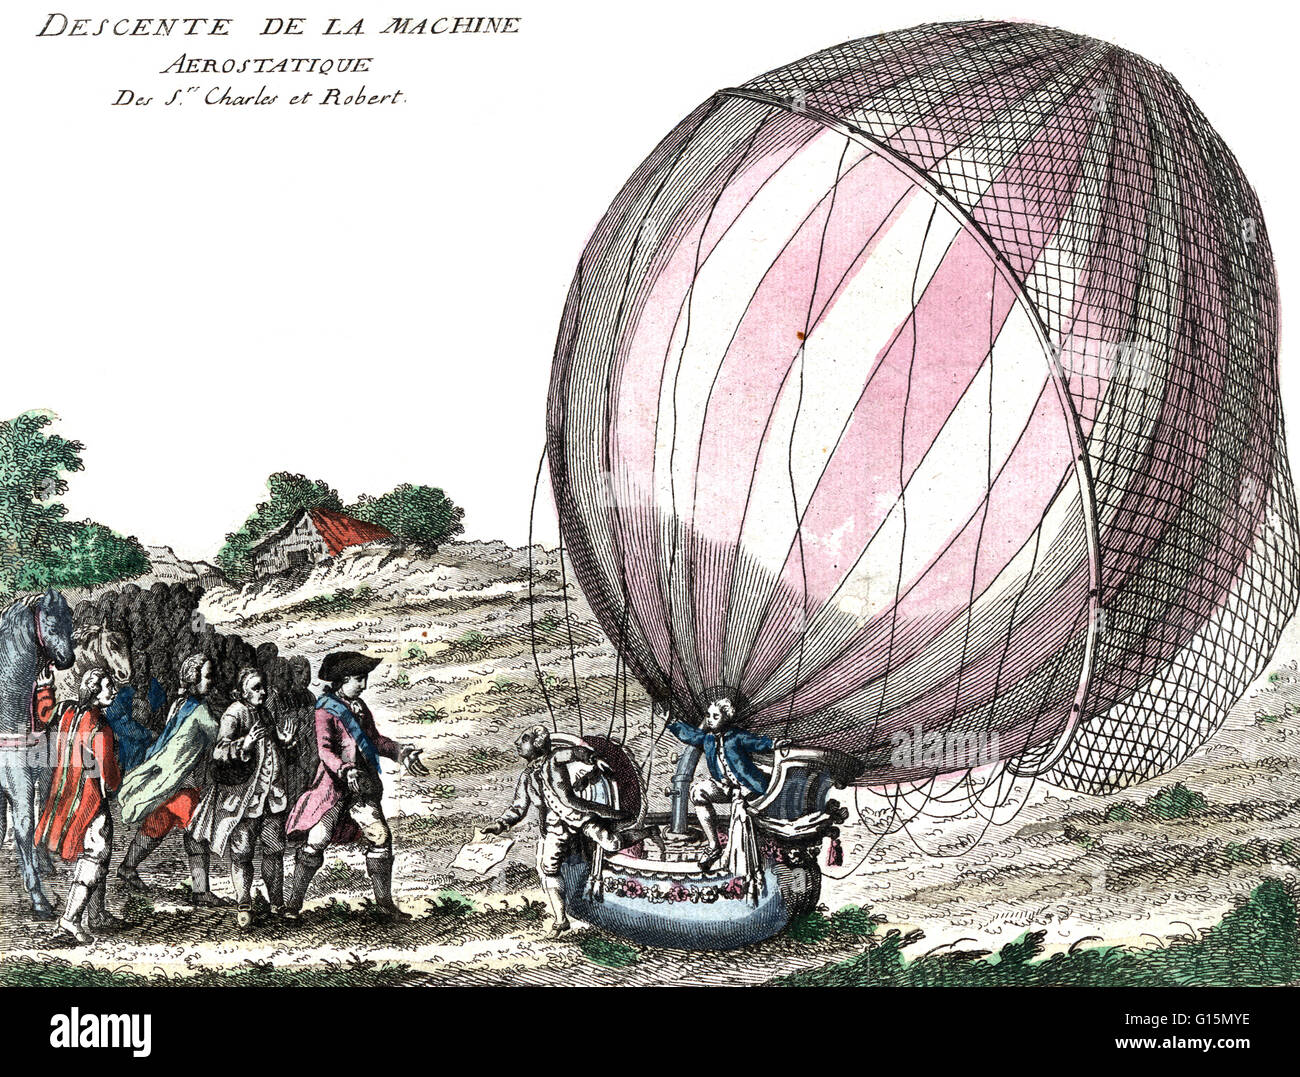 Jacques Charles and Nicolas-Louis Robert stepping out of their hydrogen balloon on a plain near Nesle, France after the first manned balloon flight in December of 1783. Jacques Alexandre César Charles (November 12, 1746 - April 7, 1823) was a French inven Stock Photo